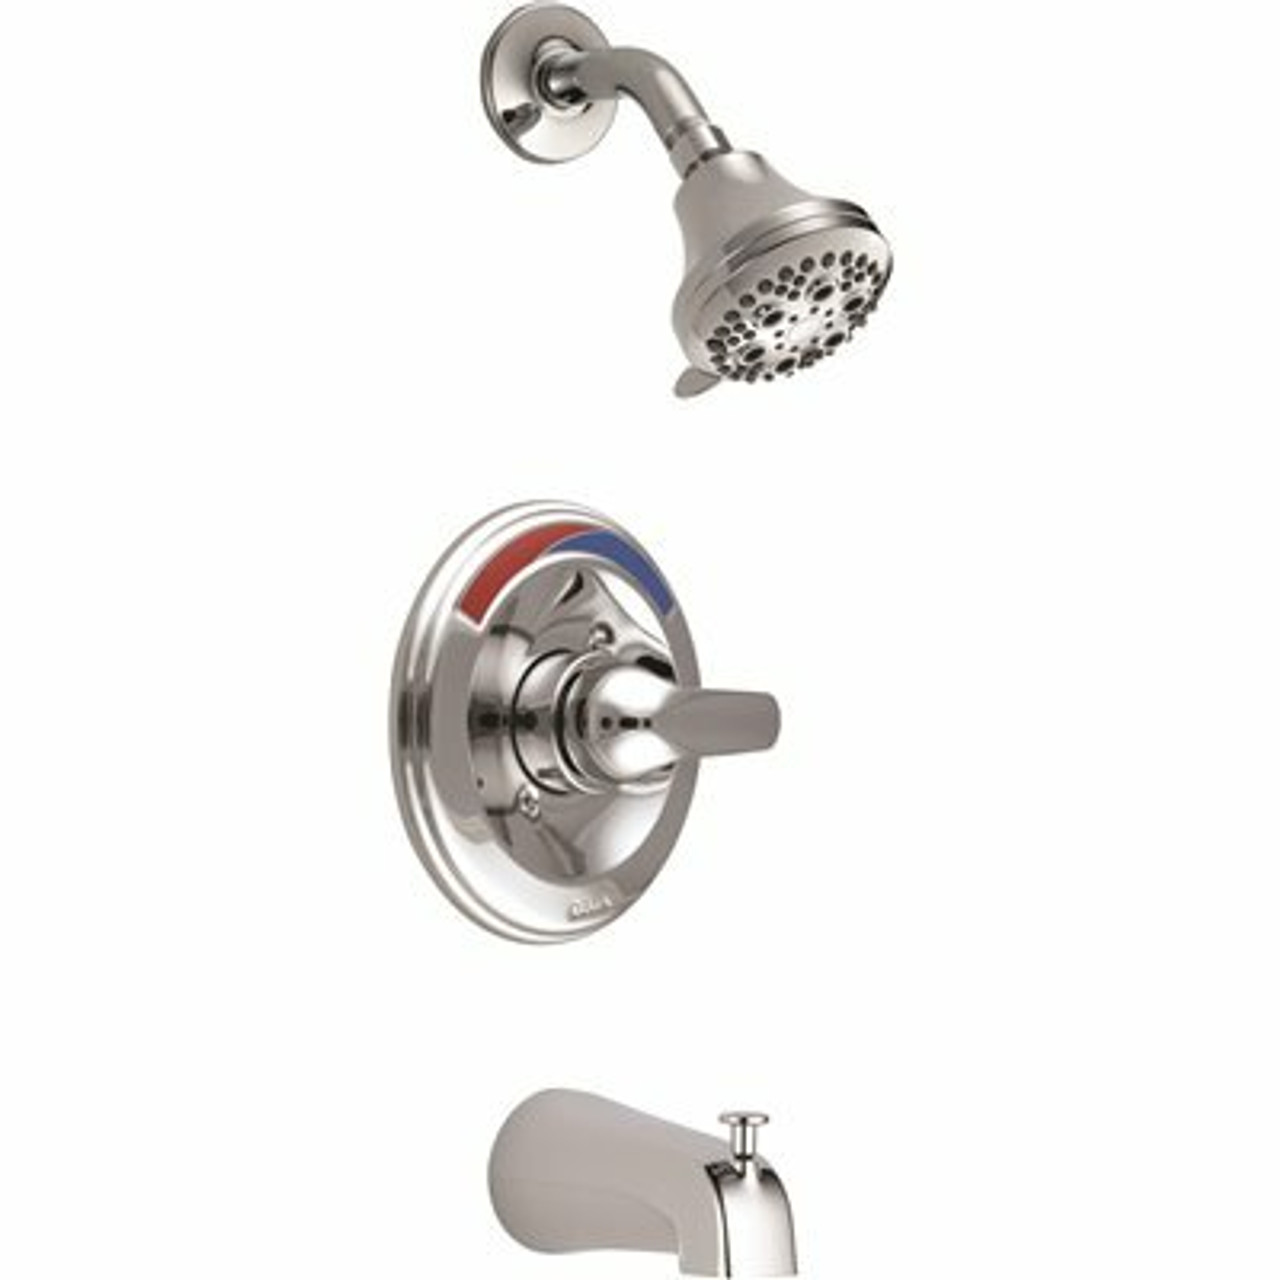 Delta 1-Handle Wall Mount Tub And Shower Faucet Trim Kit In Chrome (Valve Not Included)